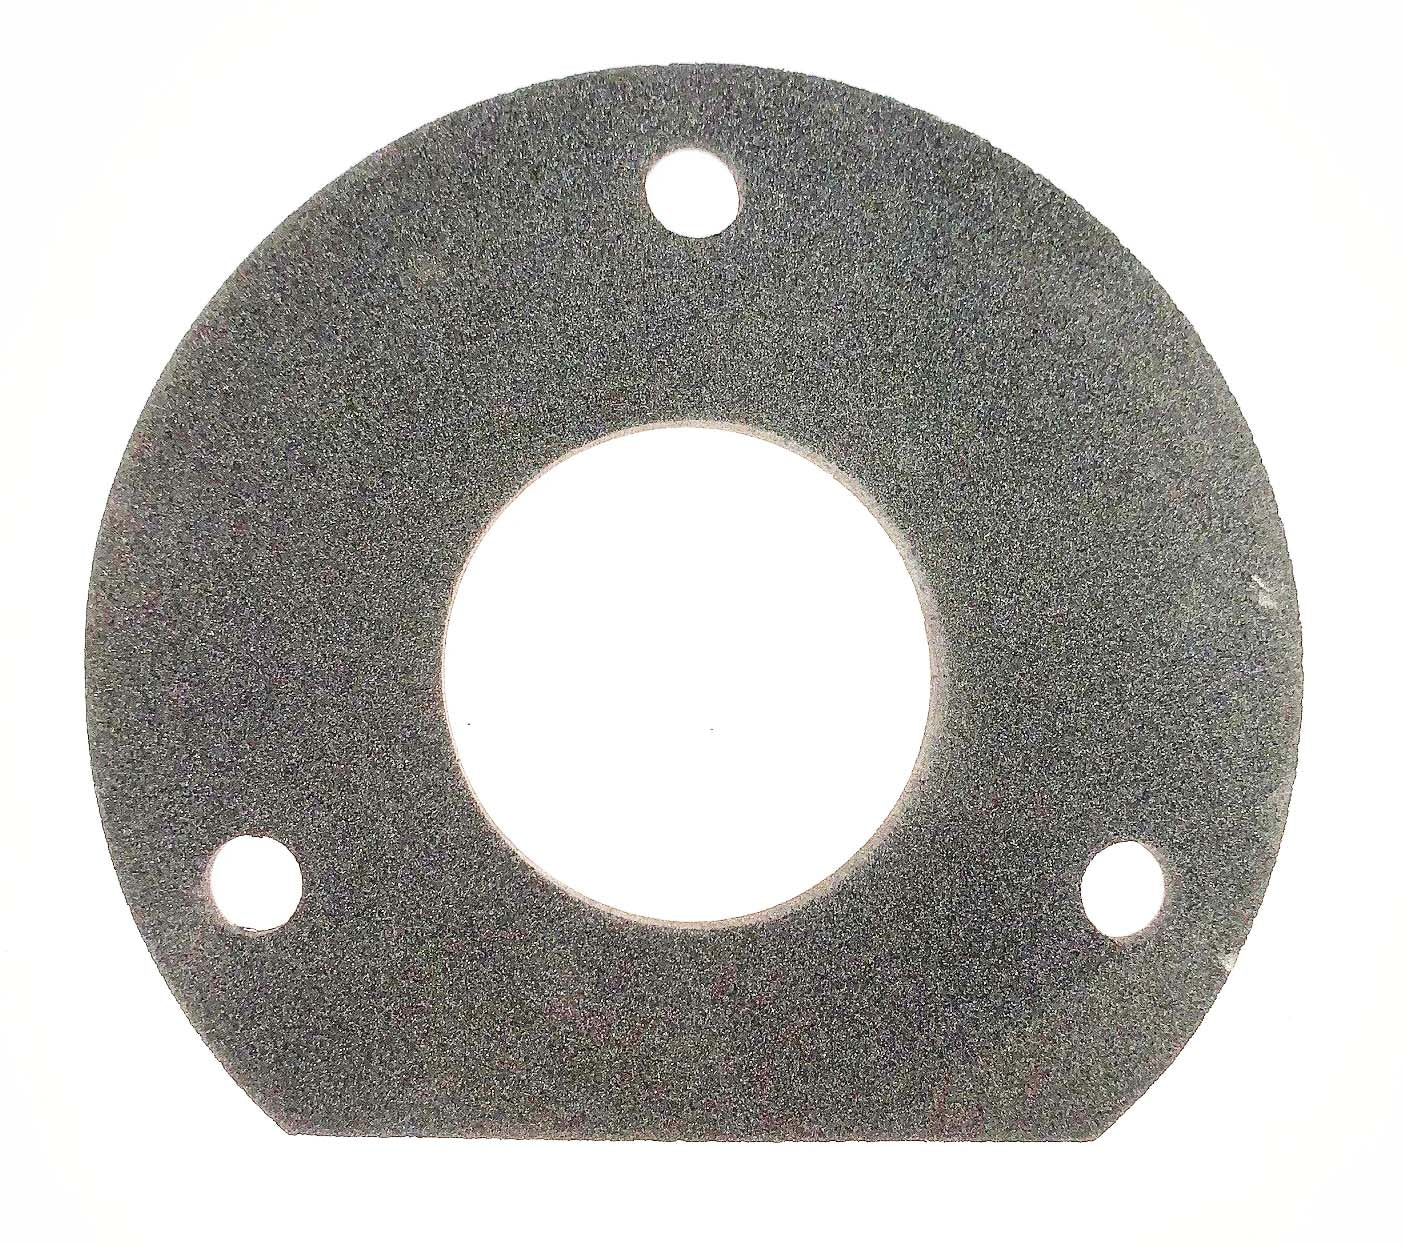 Steering Column Seal, 1967-1973, Jeepster Commando and Commando - The JeepsterMan